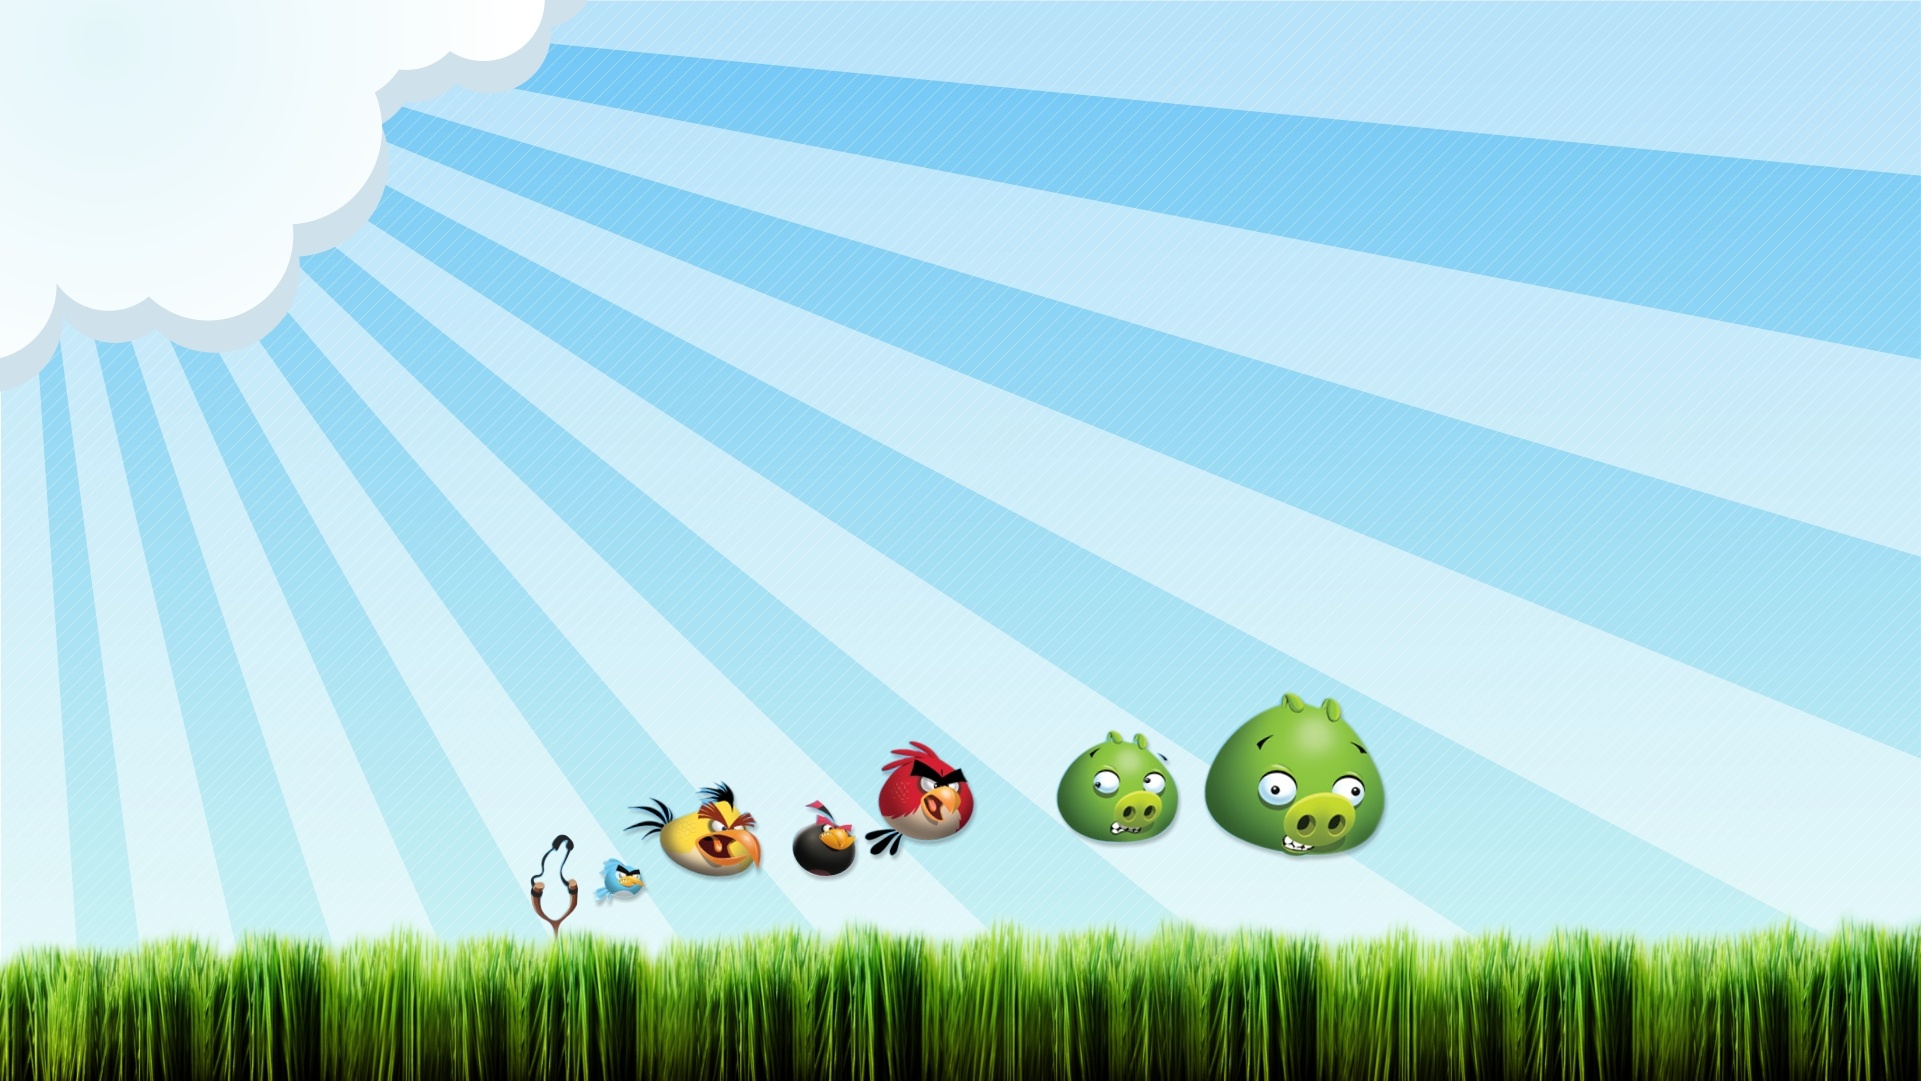 Angry Birds wallpaper collection, Colorful design, Gaming visuals, Bird characters, 1930x1090 HD Desktop